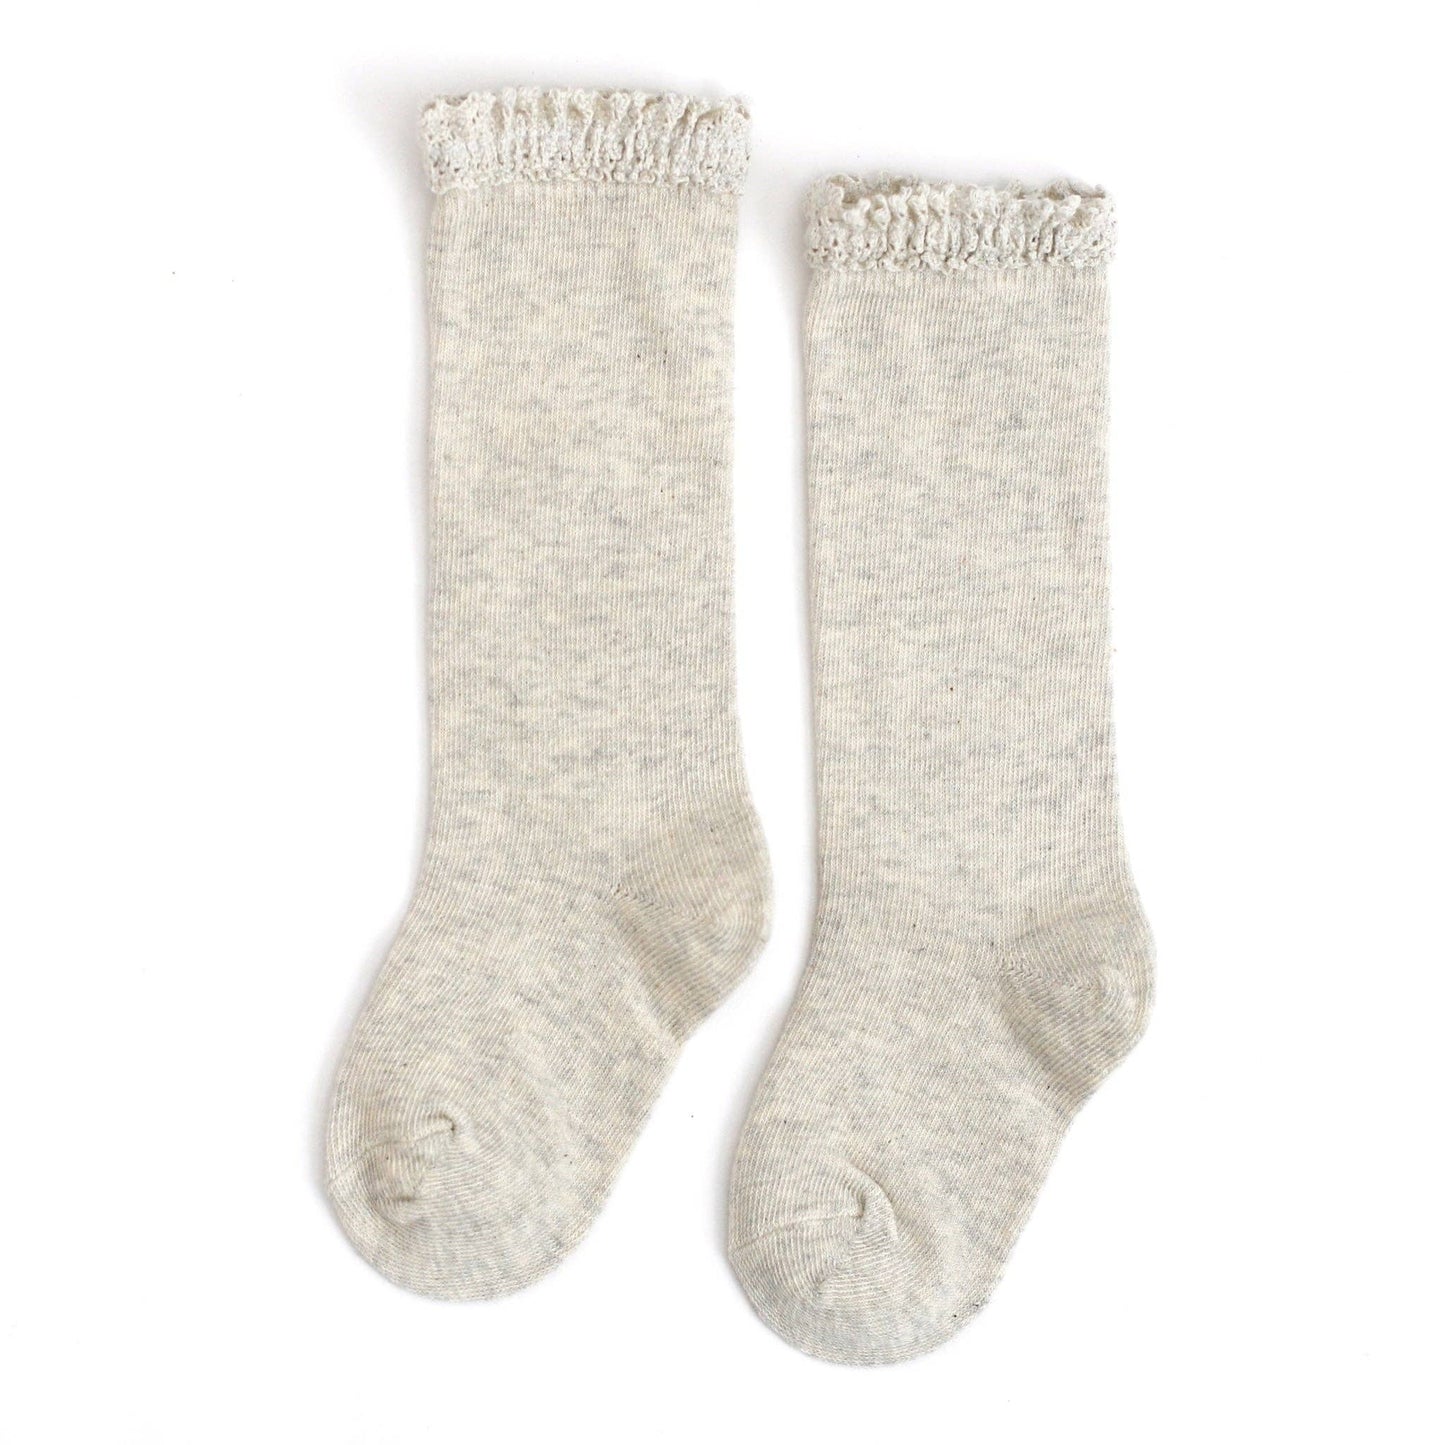 Little Stocking Co. - Heathered Ivory Lace Top Knee High Socks: 4-6 YEARS